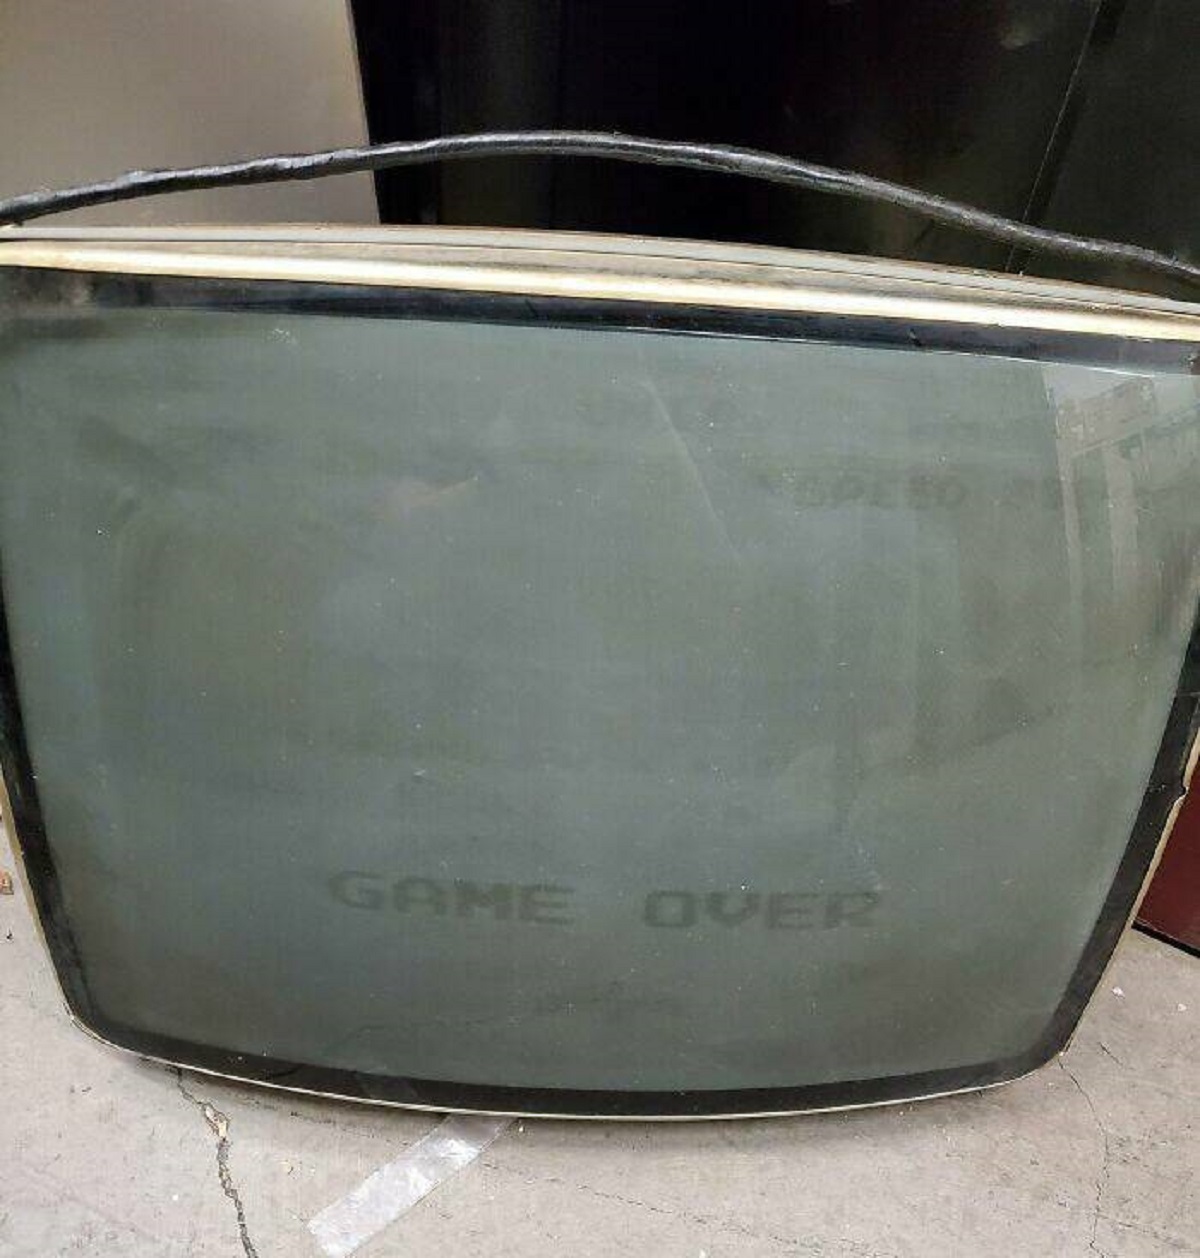 "A Broken Tube TV In My Work Has "Game Over" Burnt Into The Screen"